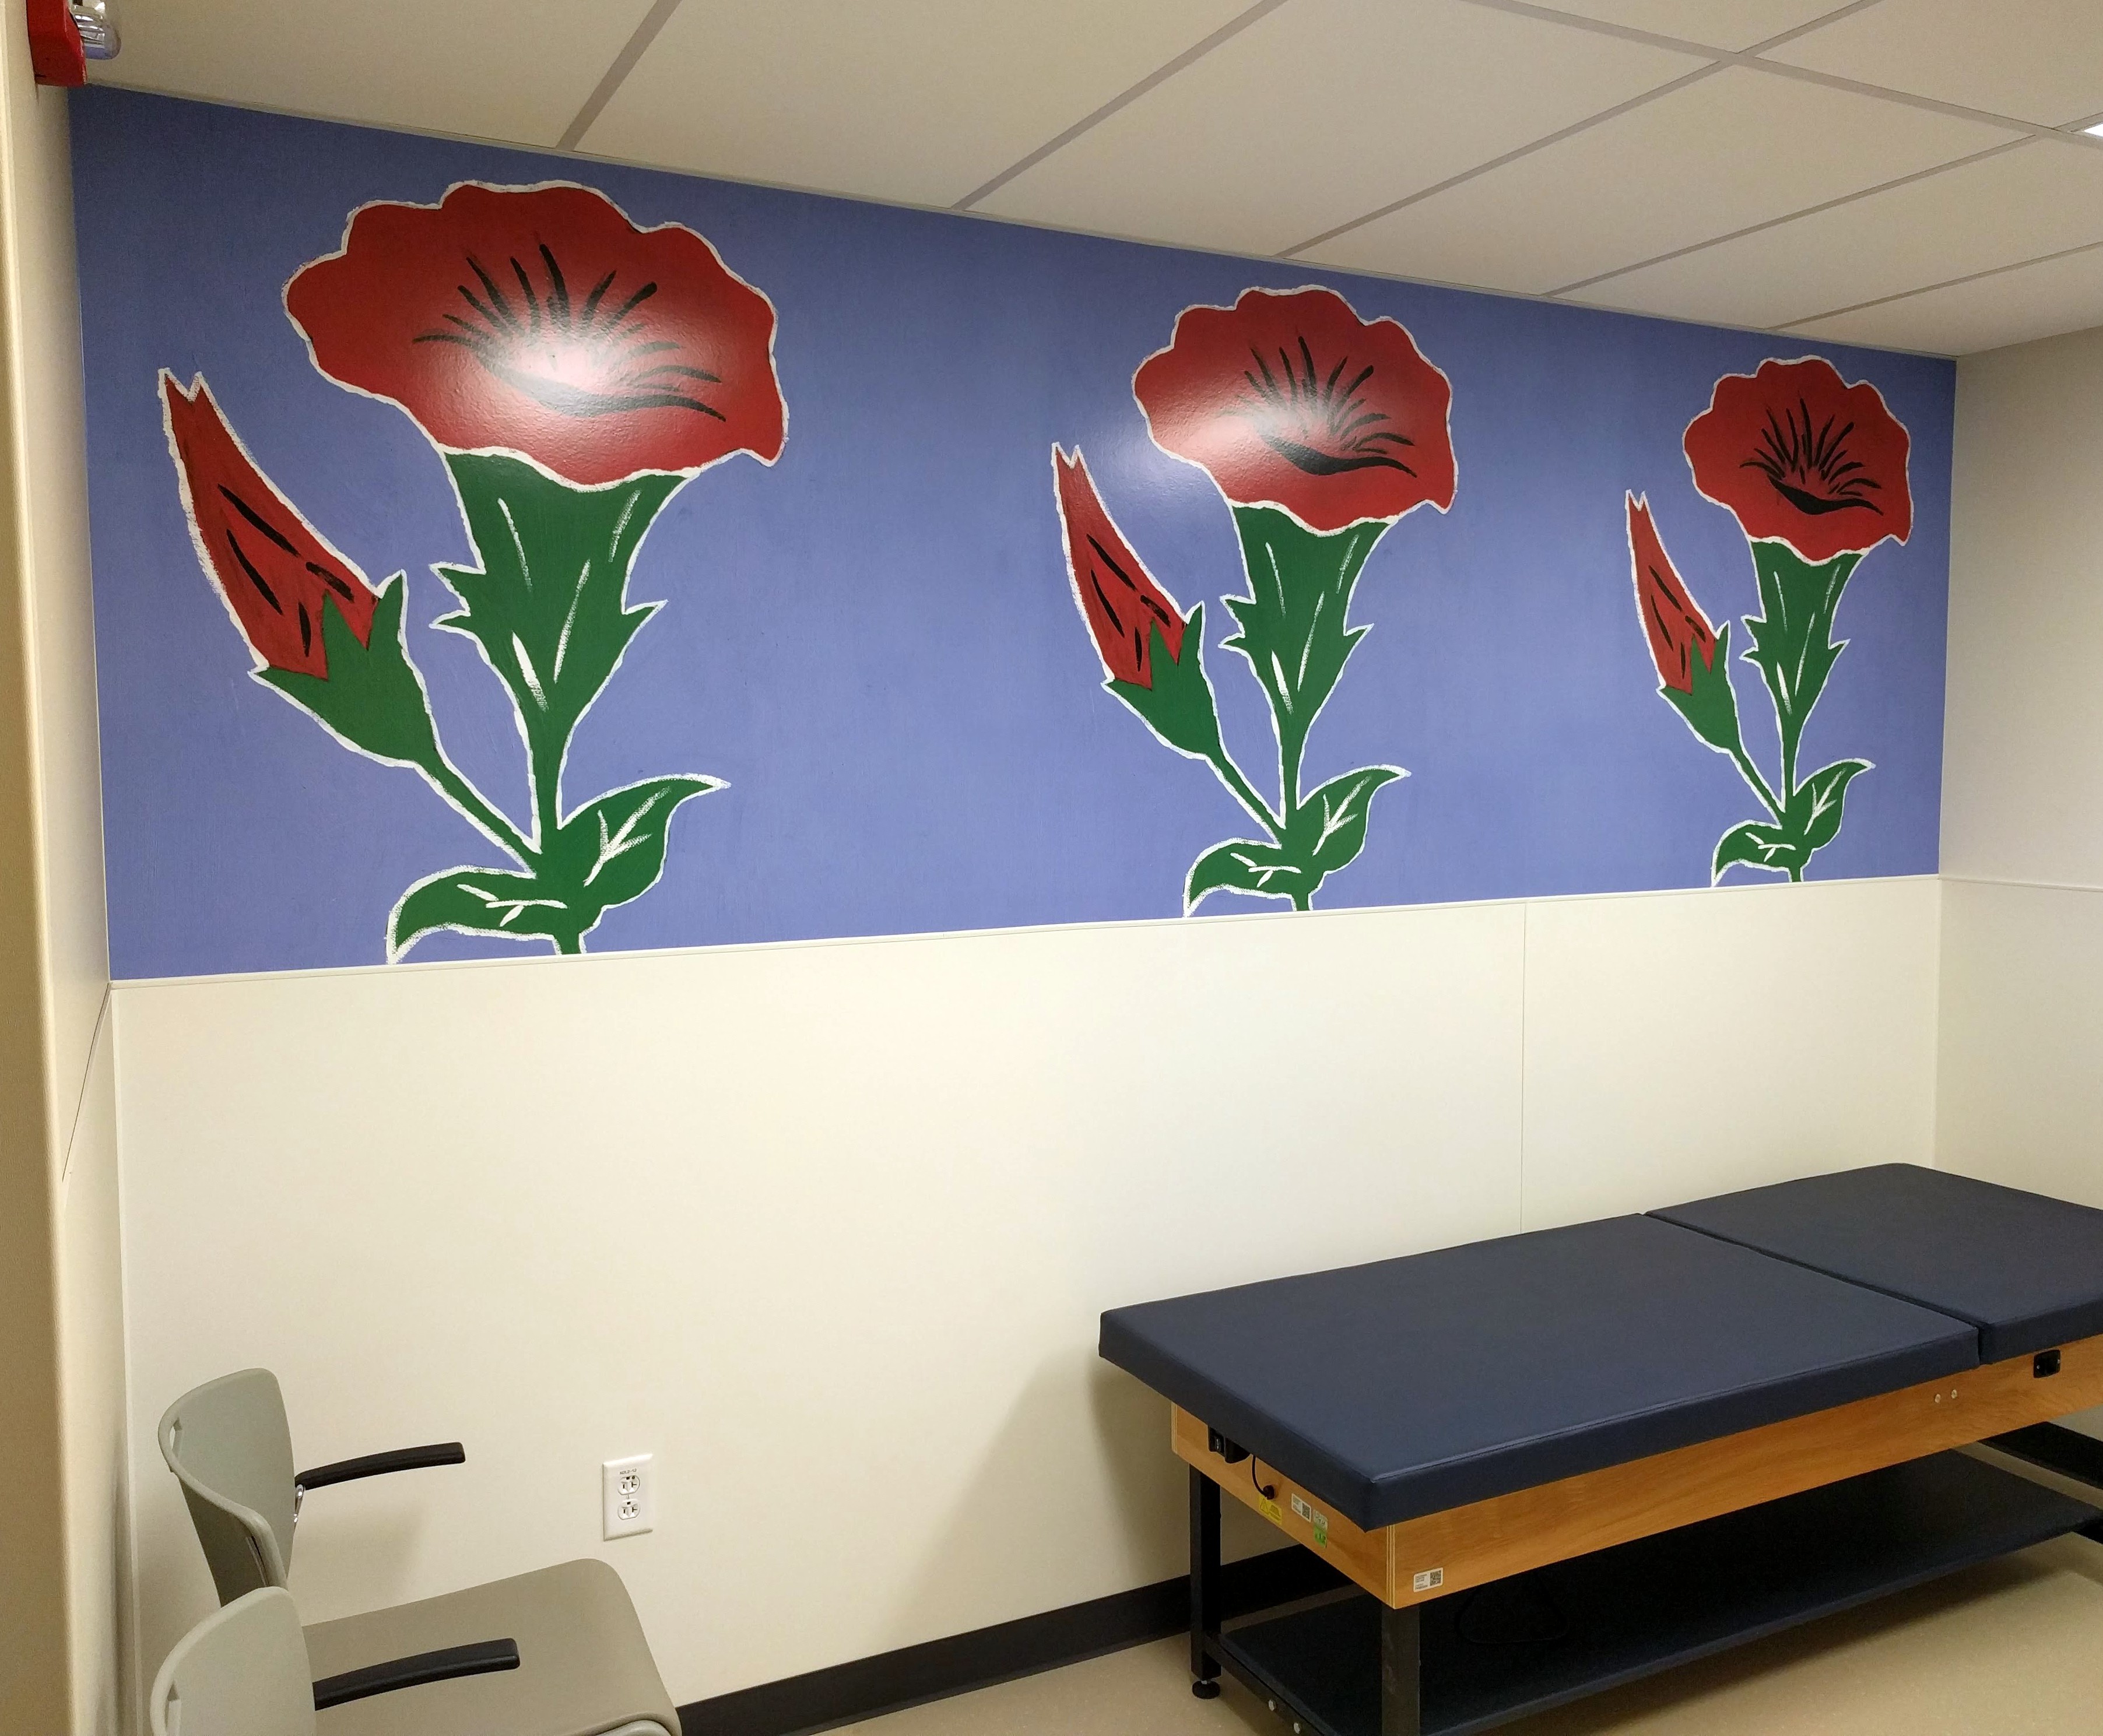 exam room wall mural at UCSF children's hospital